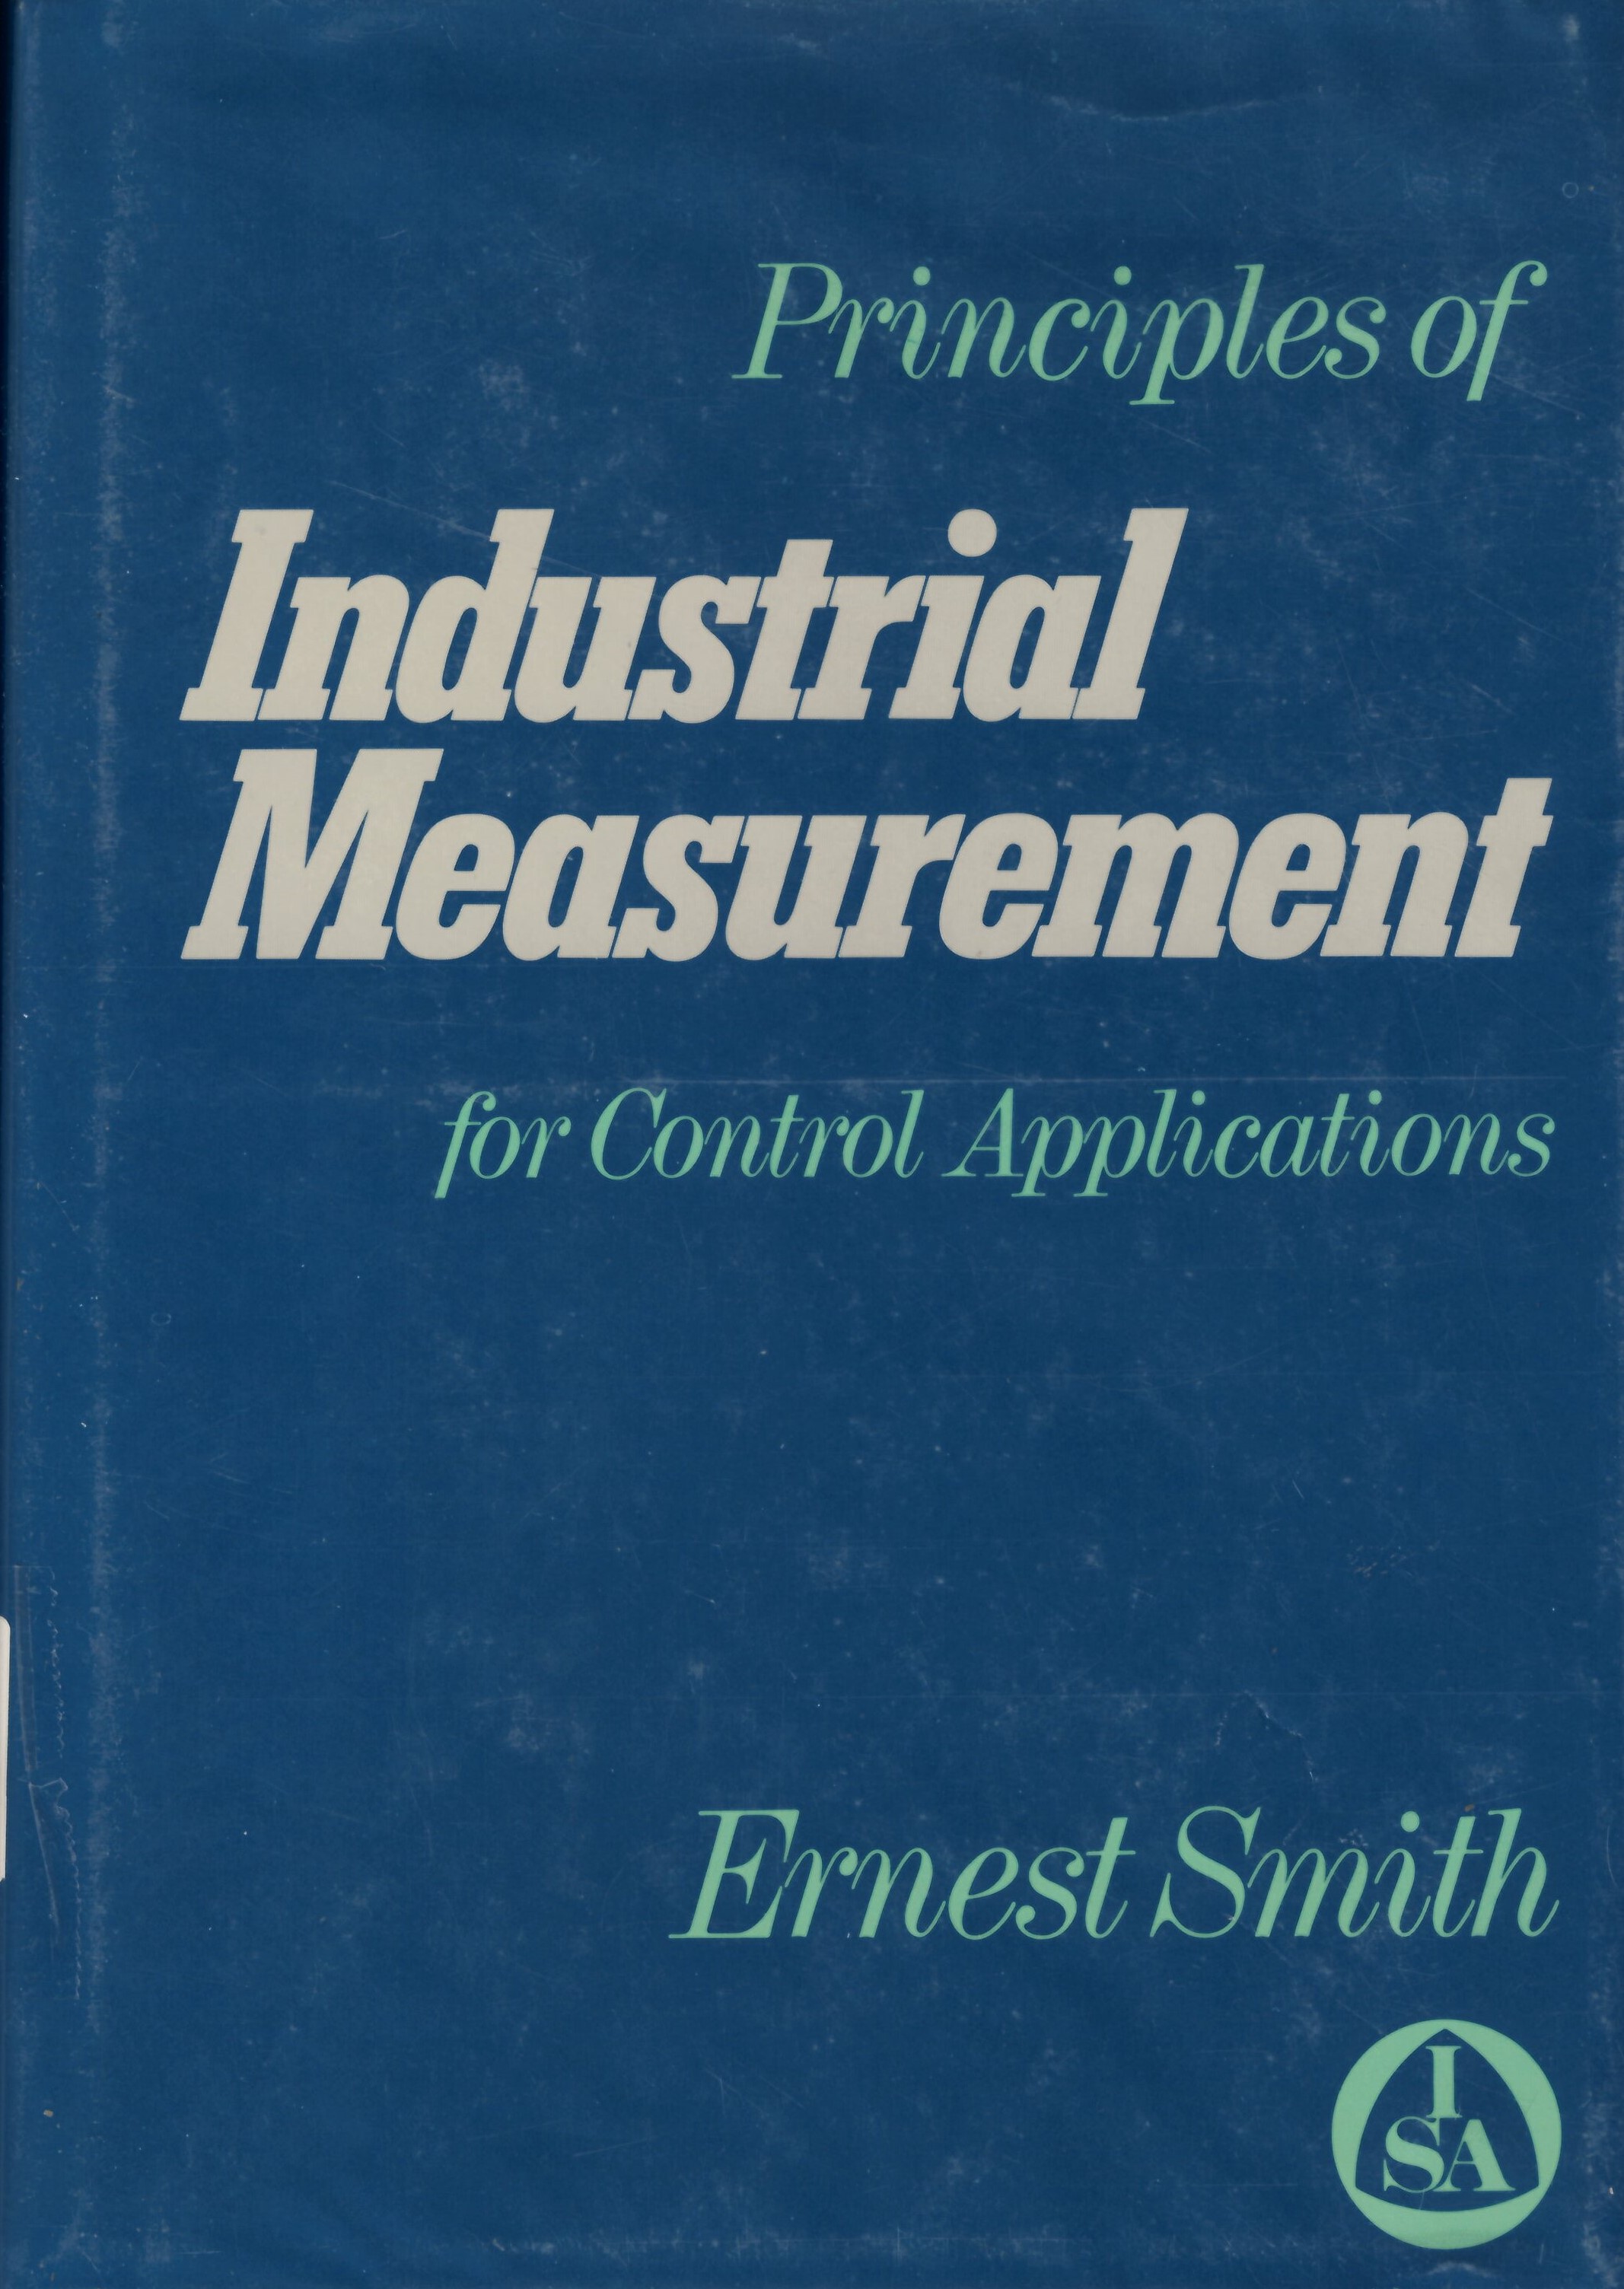 Principles of industrial measurement for control applications